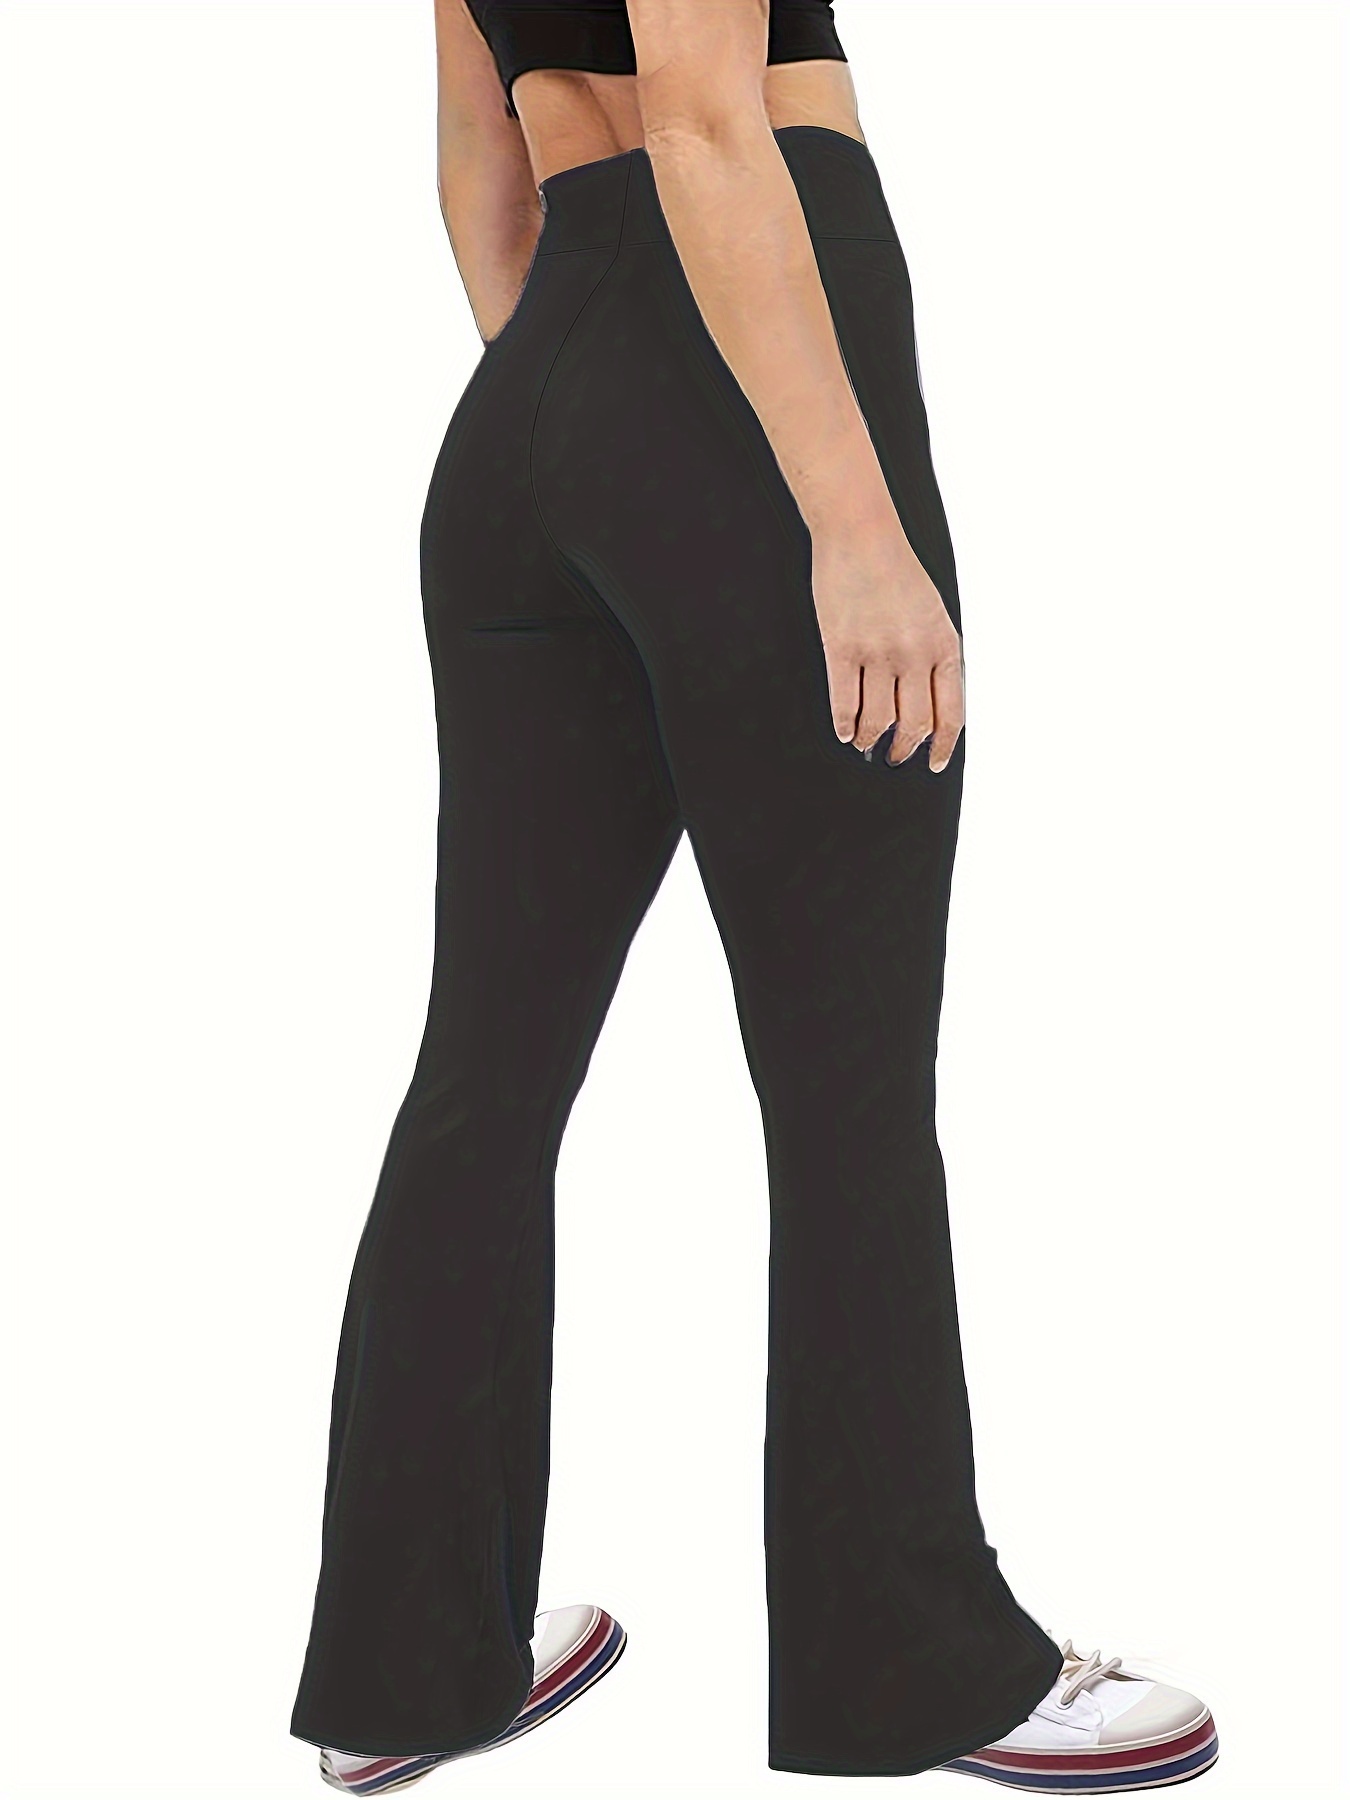  Girl V-Cut Yoga Flare Pants with Pockets-Kid Workout Cross  Causal Stretchy Tummy Control Pants Black/Black/Black : Clothing, Shoes &  Jewelry